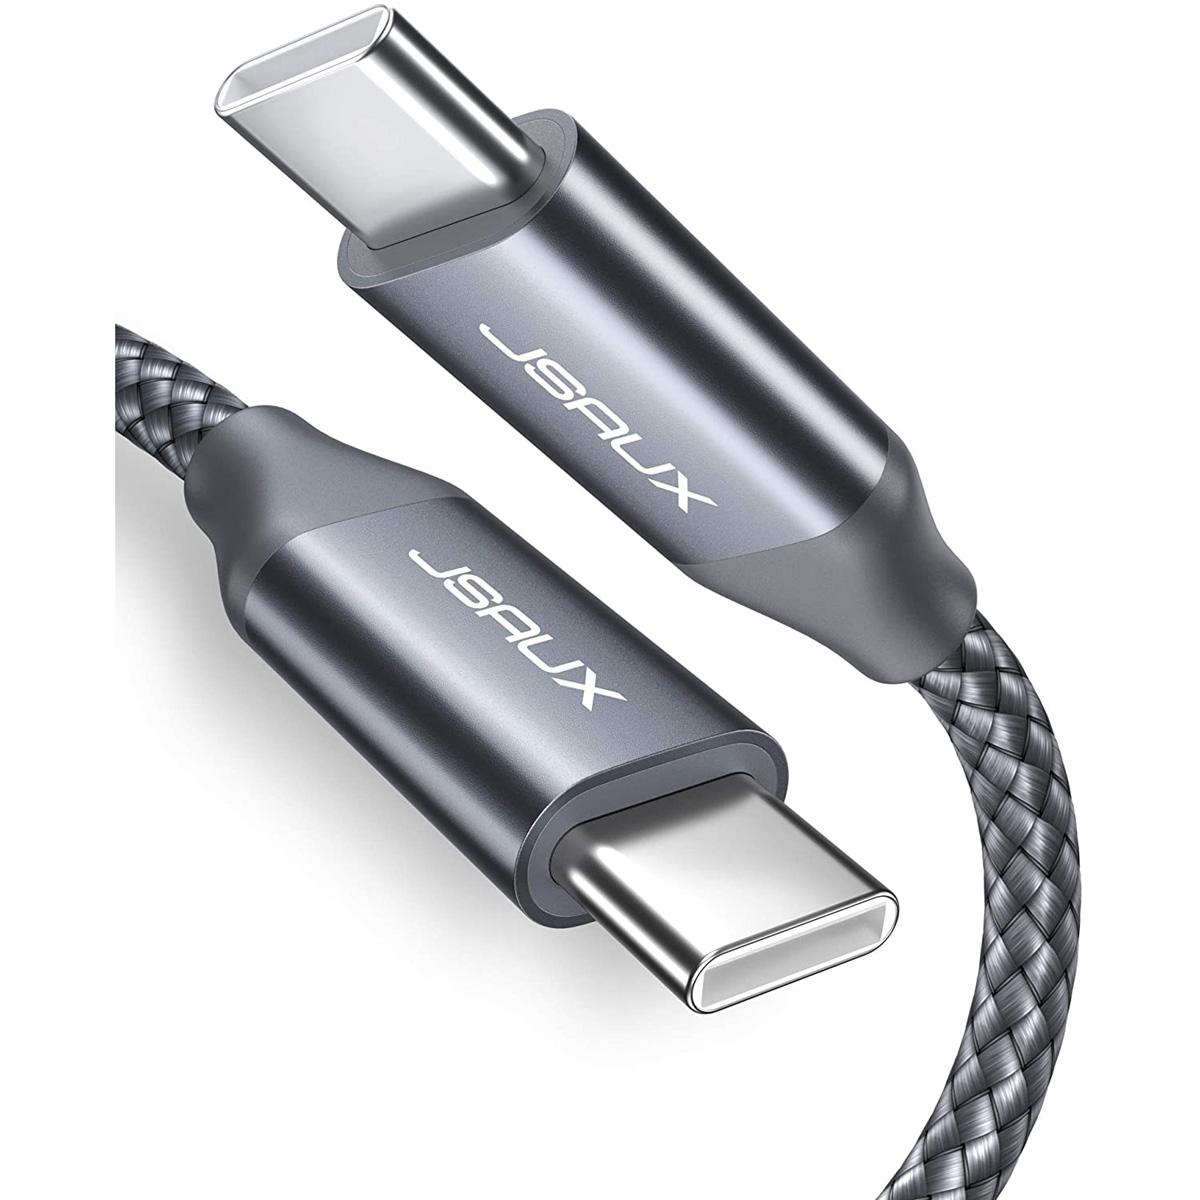 2 USB-C to USB-C 60w Cables for $6.44